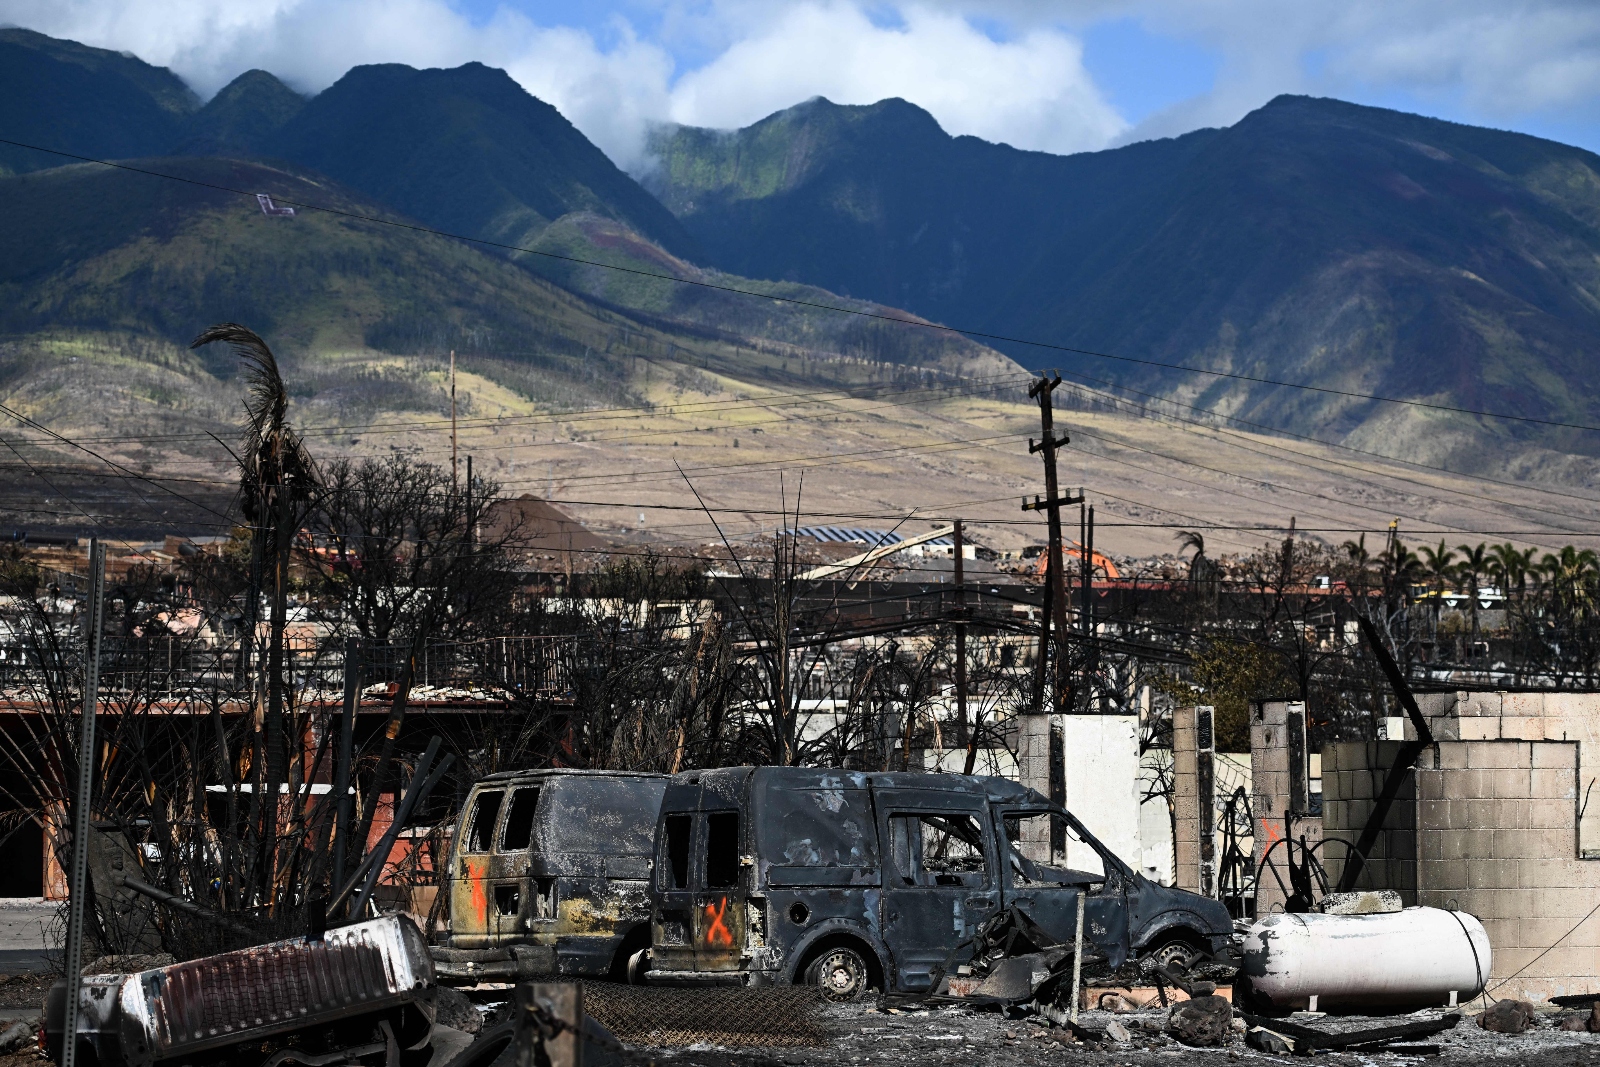 Charred ruins in the city of Lahaina after wildfires struck the island of Maui. The island's power utility, Hawaiian Electric, has been blamed for causing the fires.